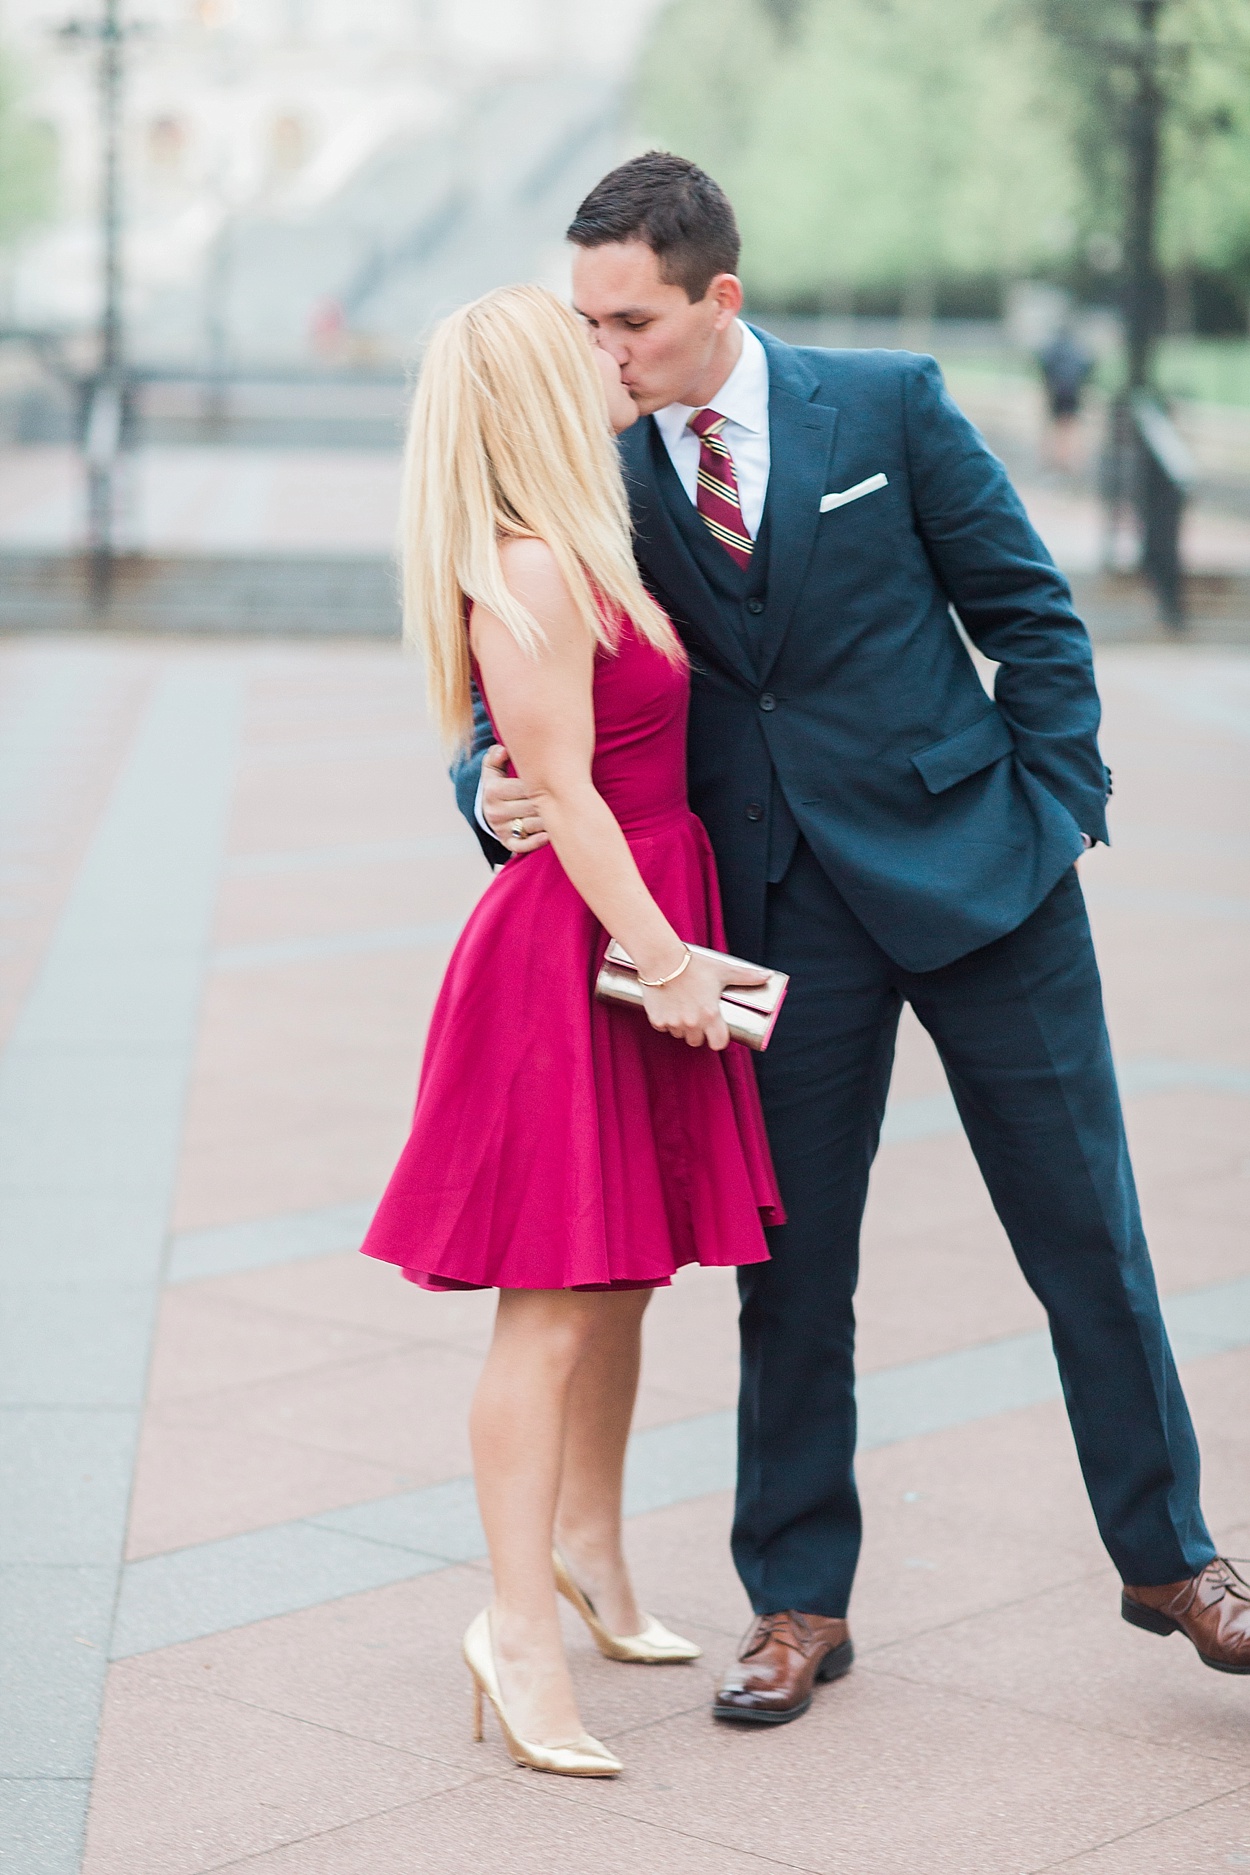 Capitol Hill proposal | Abby Grace Photography